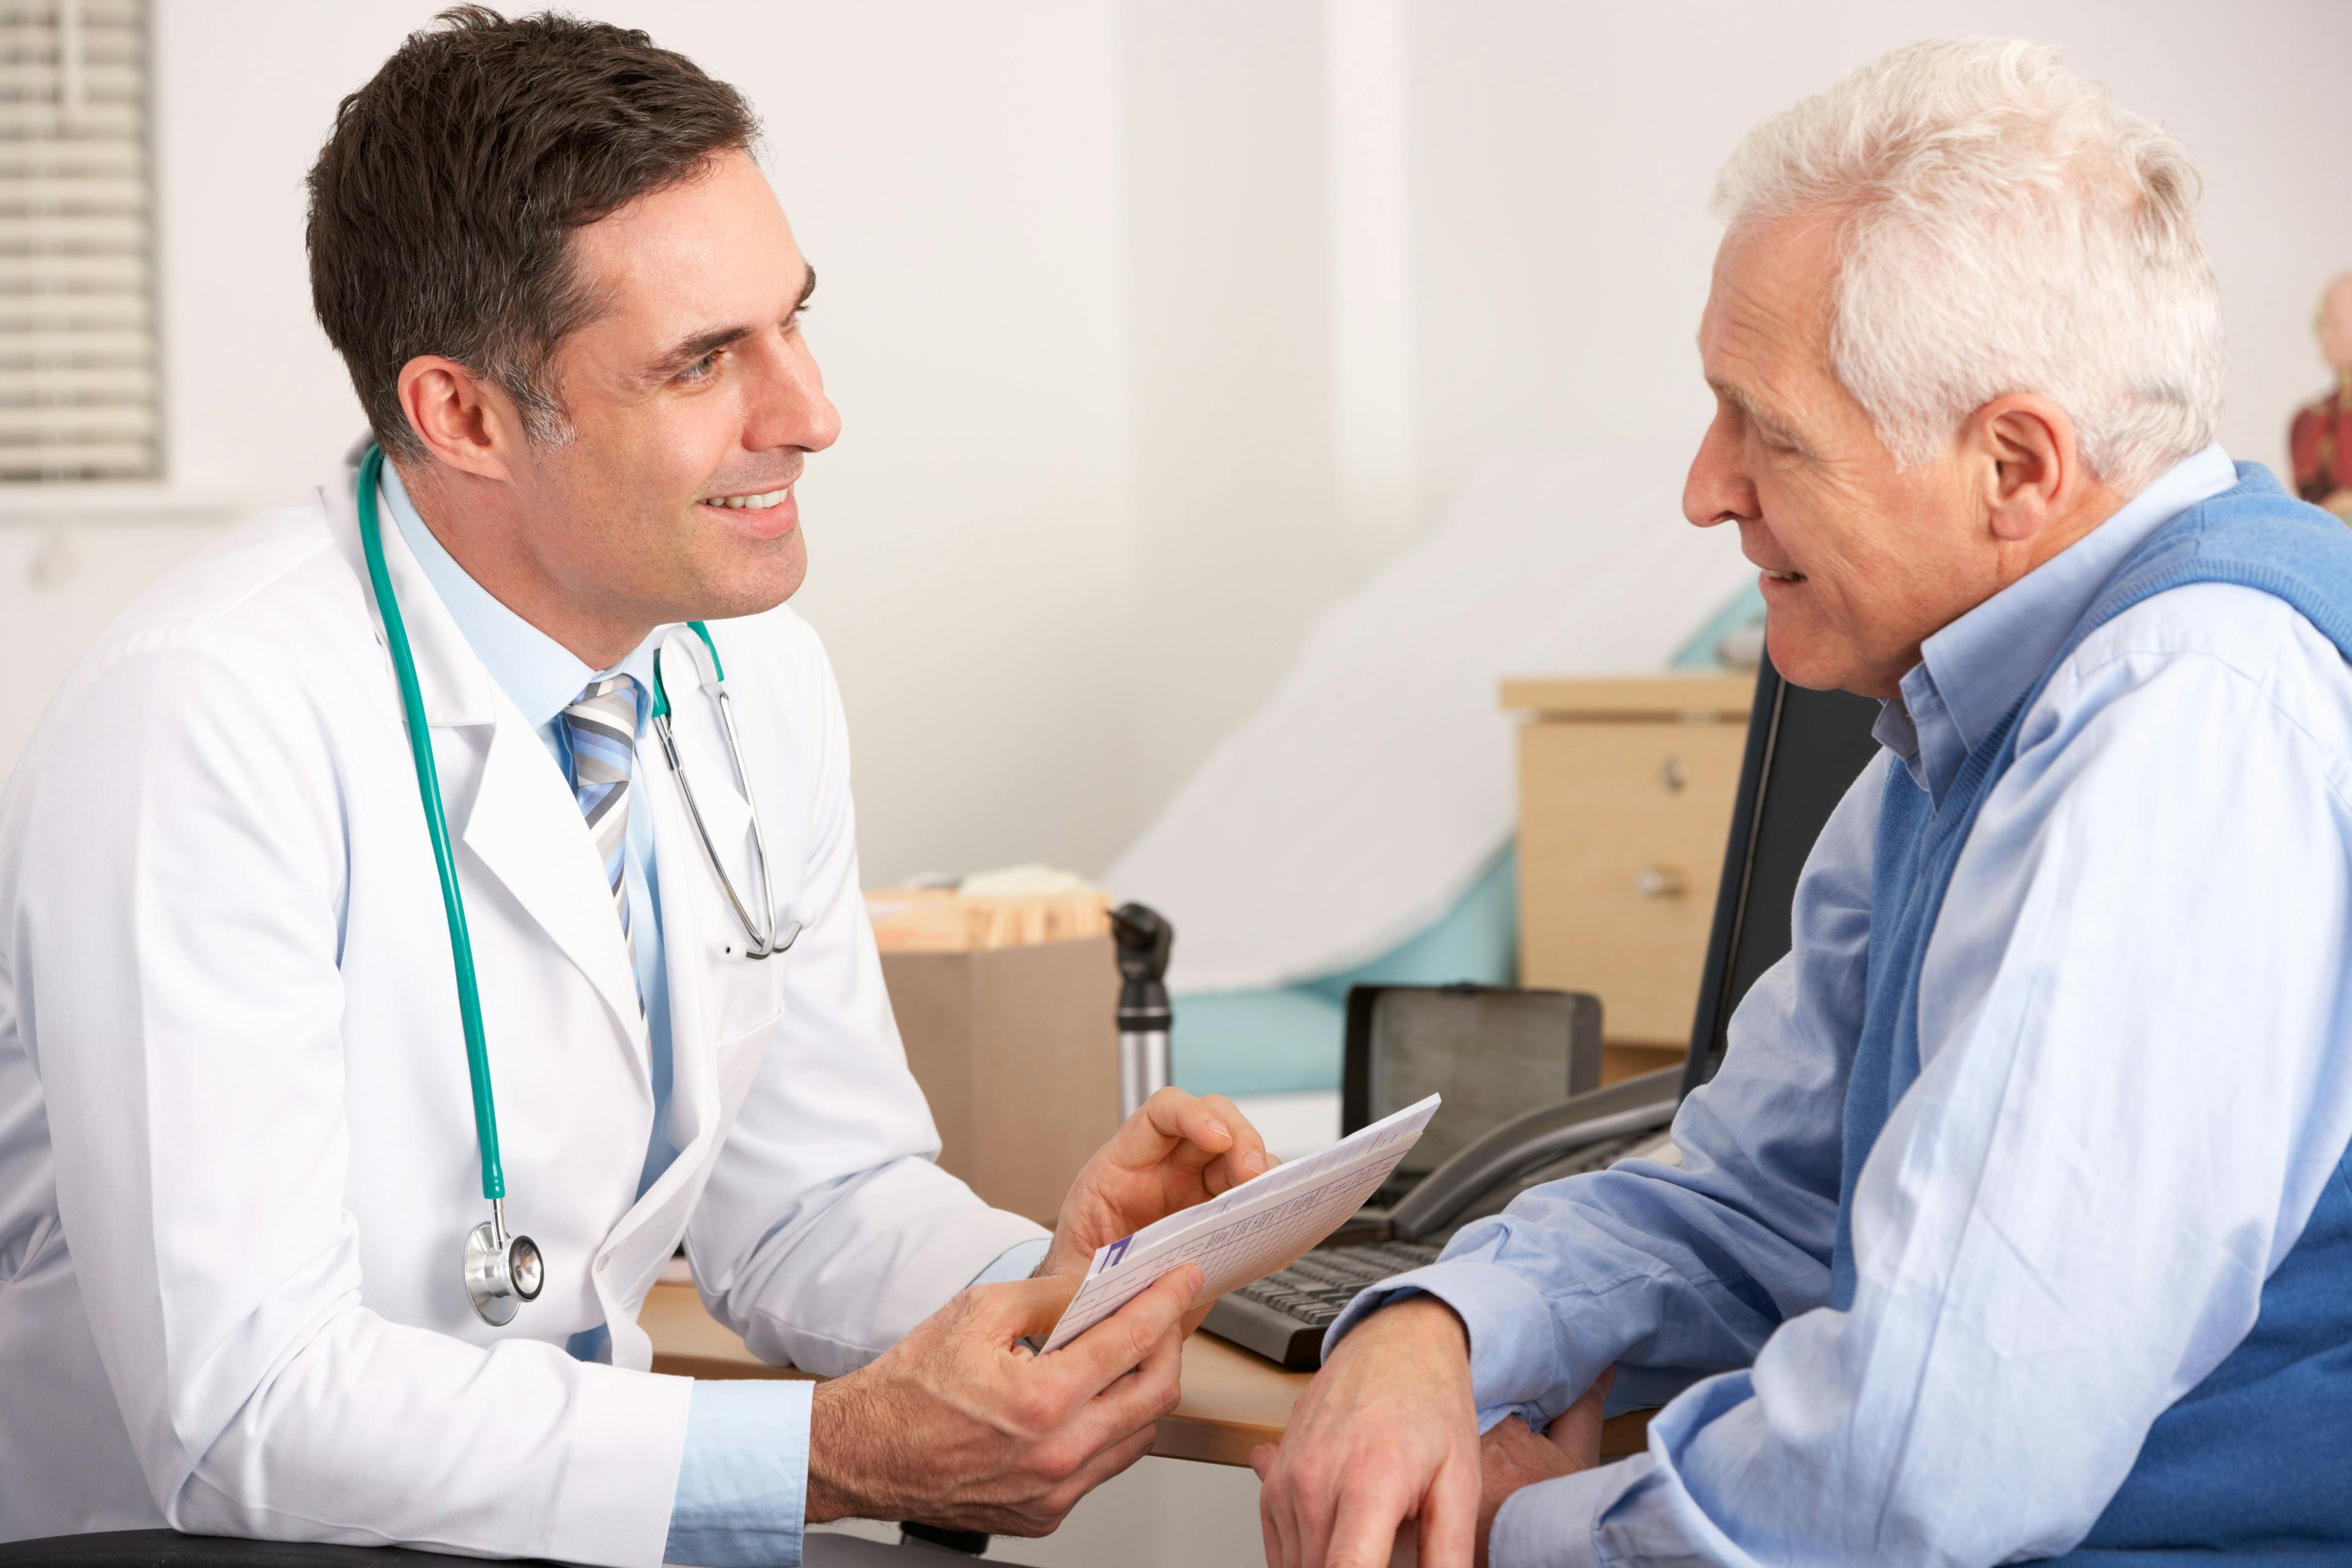 Older Patients With RA More Likely to be Undermedicated 